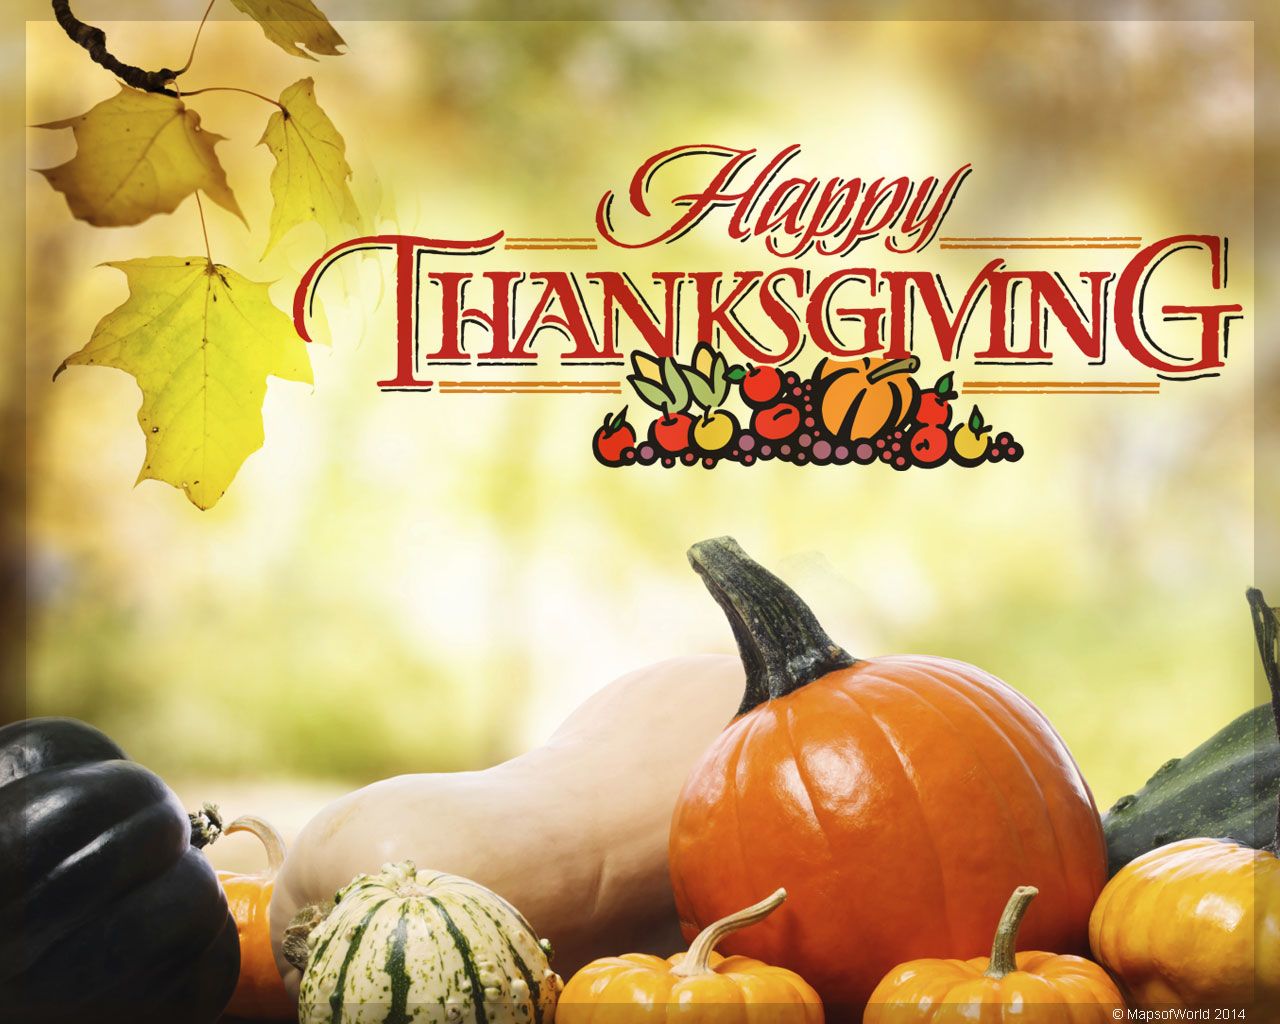 Happy Thanksgiving 2020 Wallpapers - Wallpaper Cave